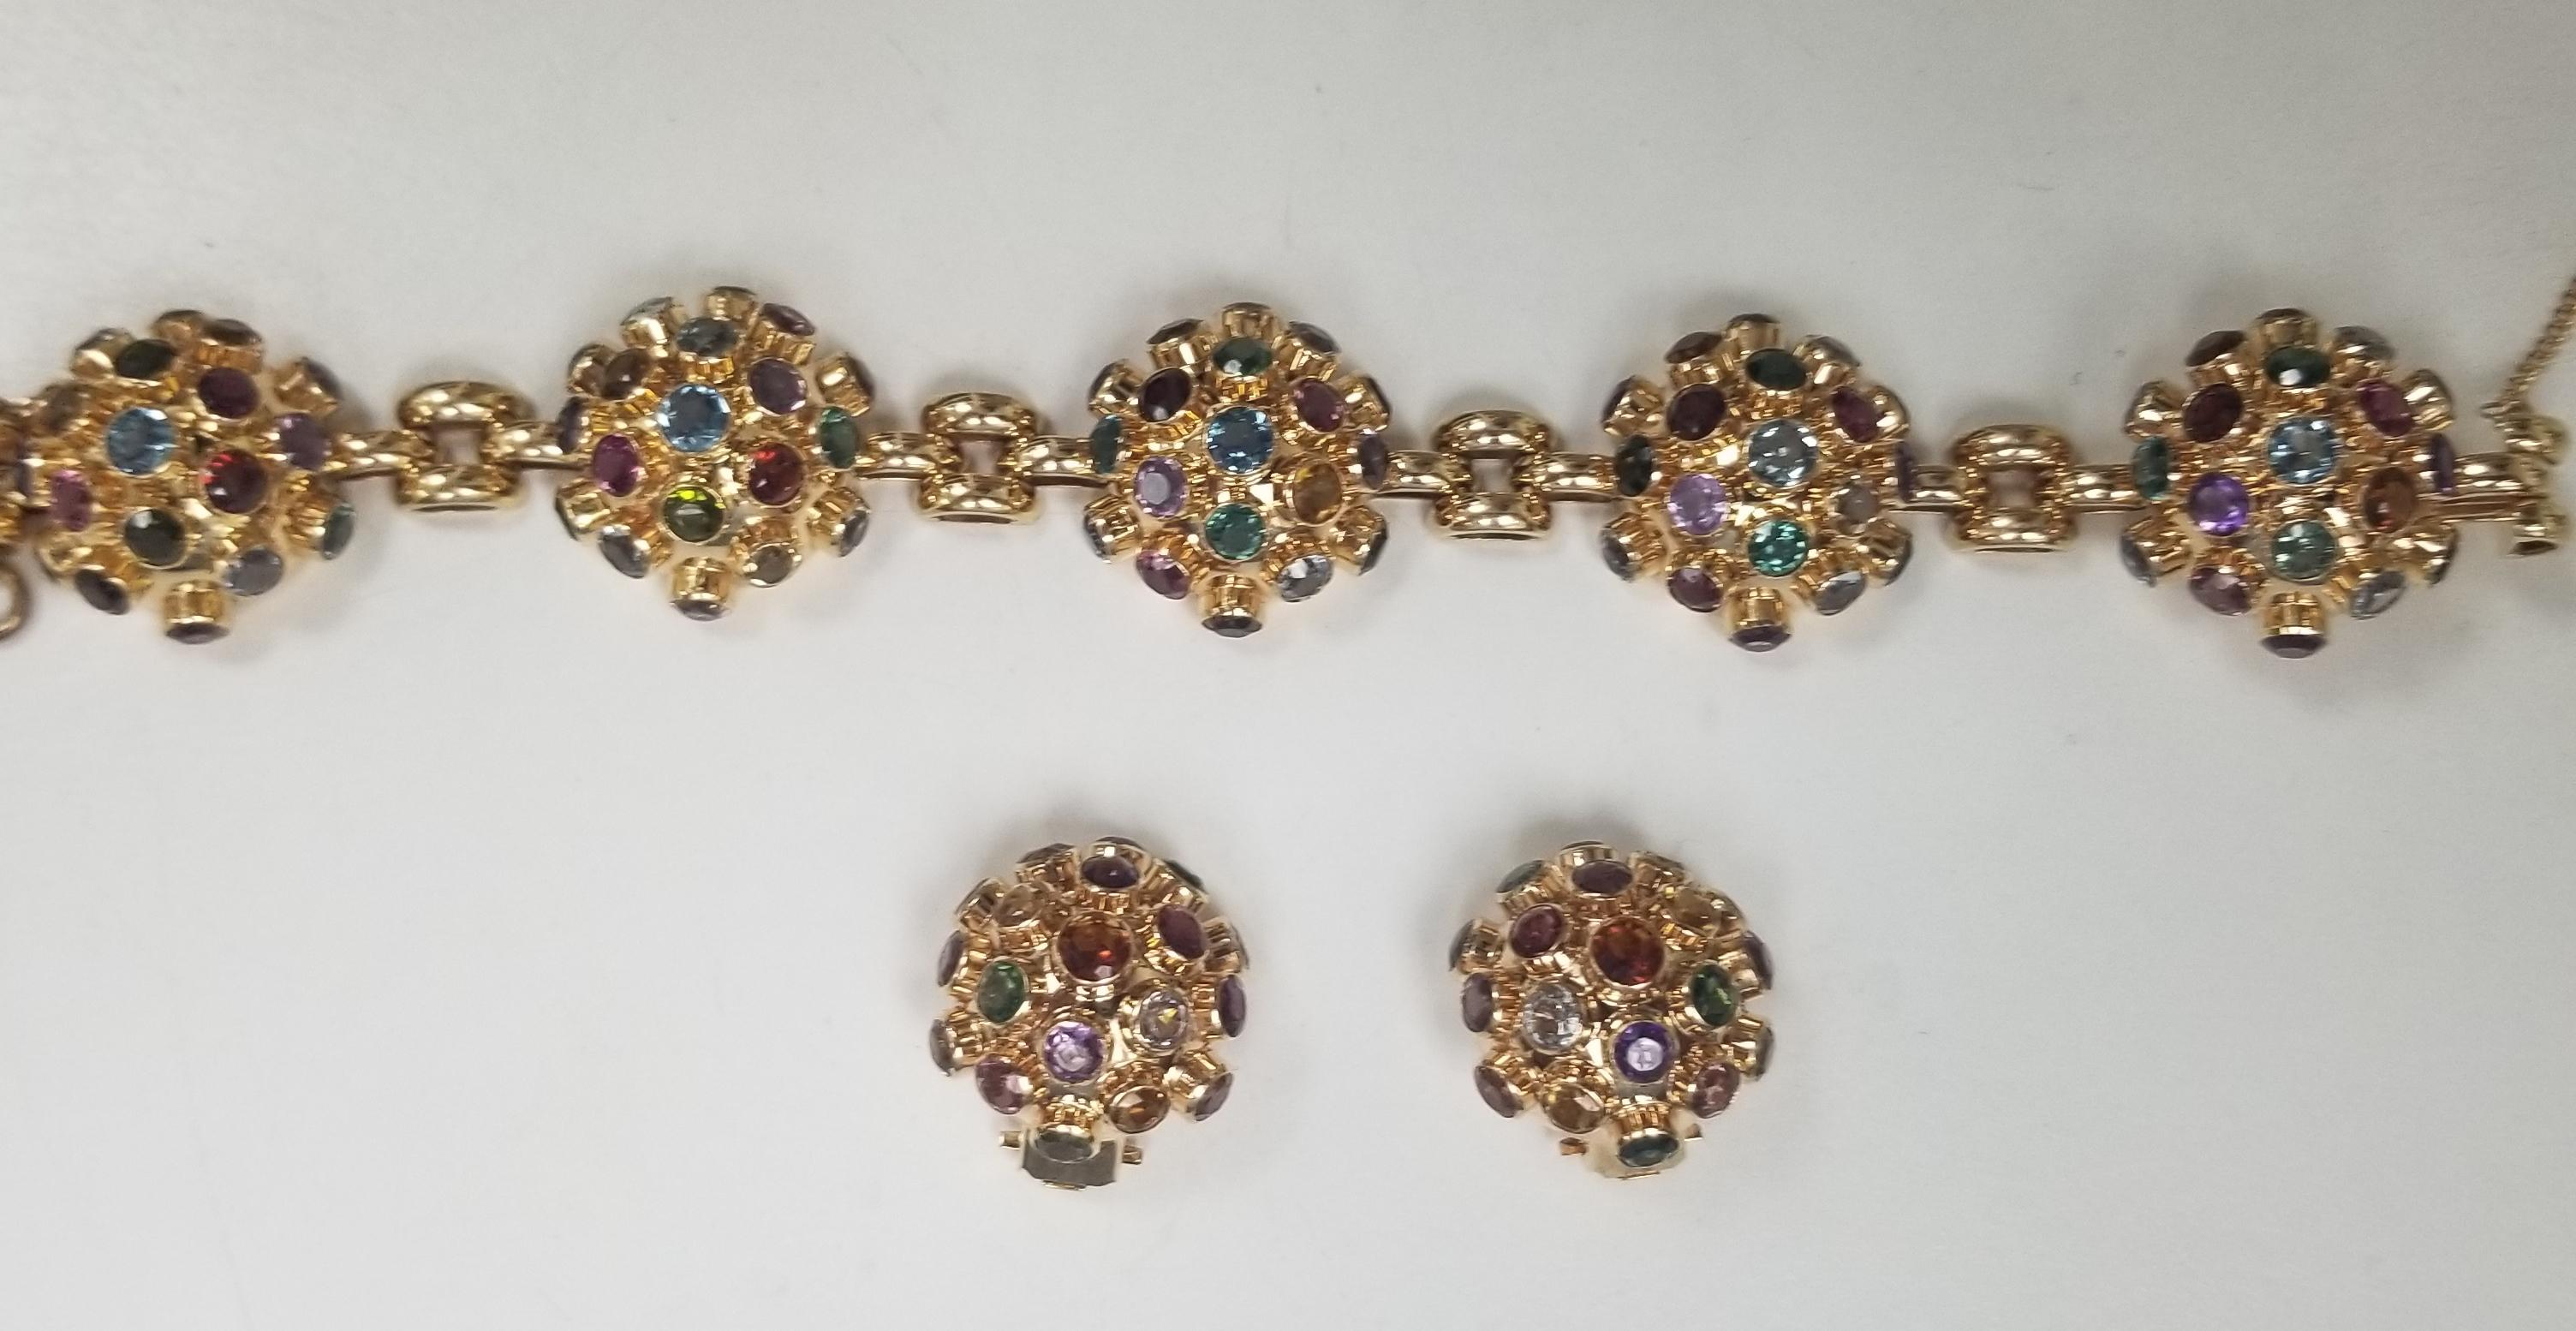 Bracelet and earring set.
A vintage Sputnik style bracelet in 18 karat rose gold. Featuring a plethora of gemstones including 95 stones Pink and Green tourmaline, Amethyst, Citrine, Garnet, Aquamarine, and more this is a fantastic example of an